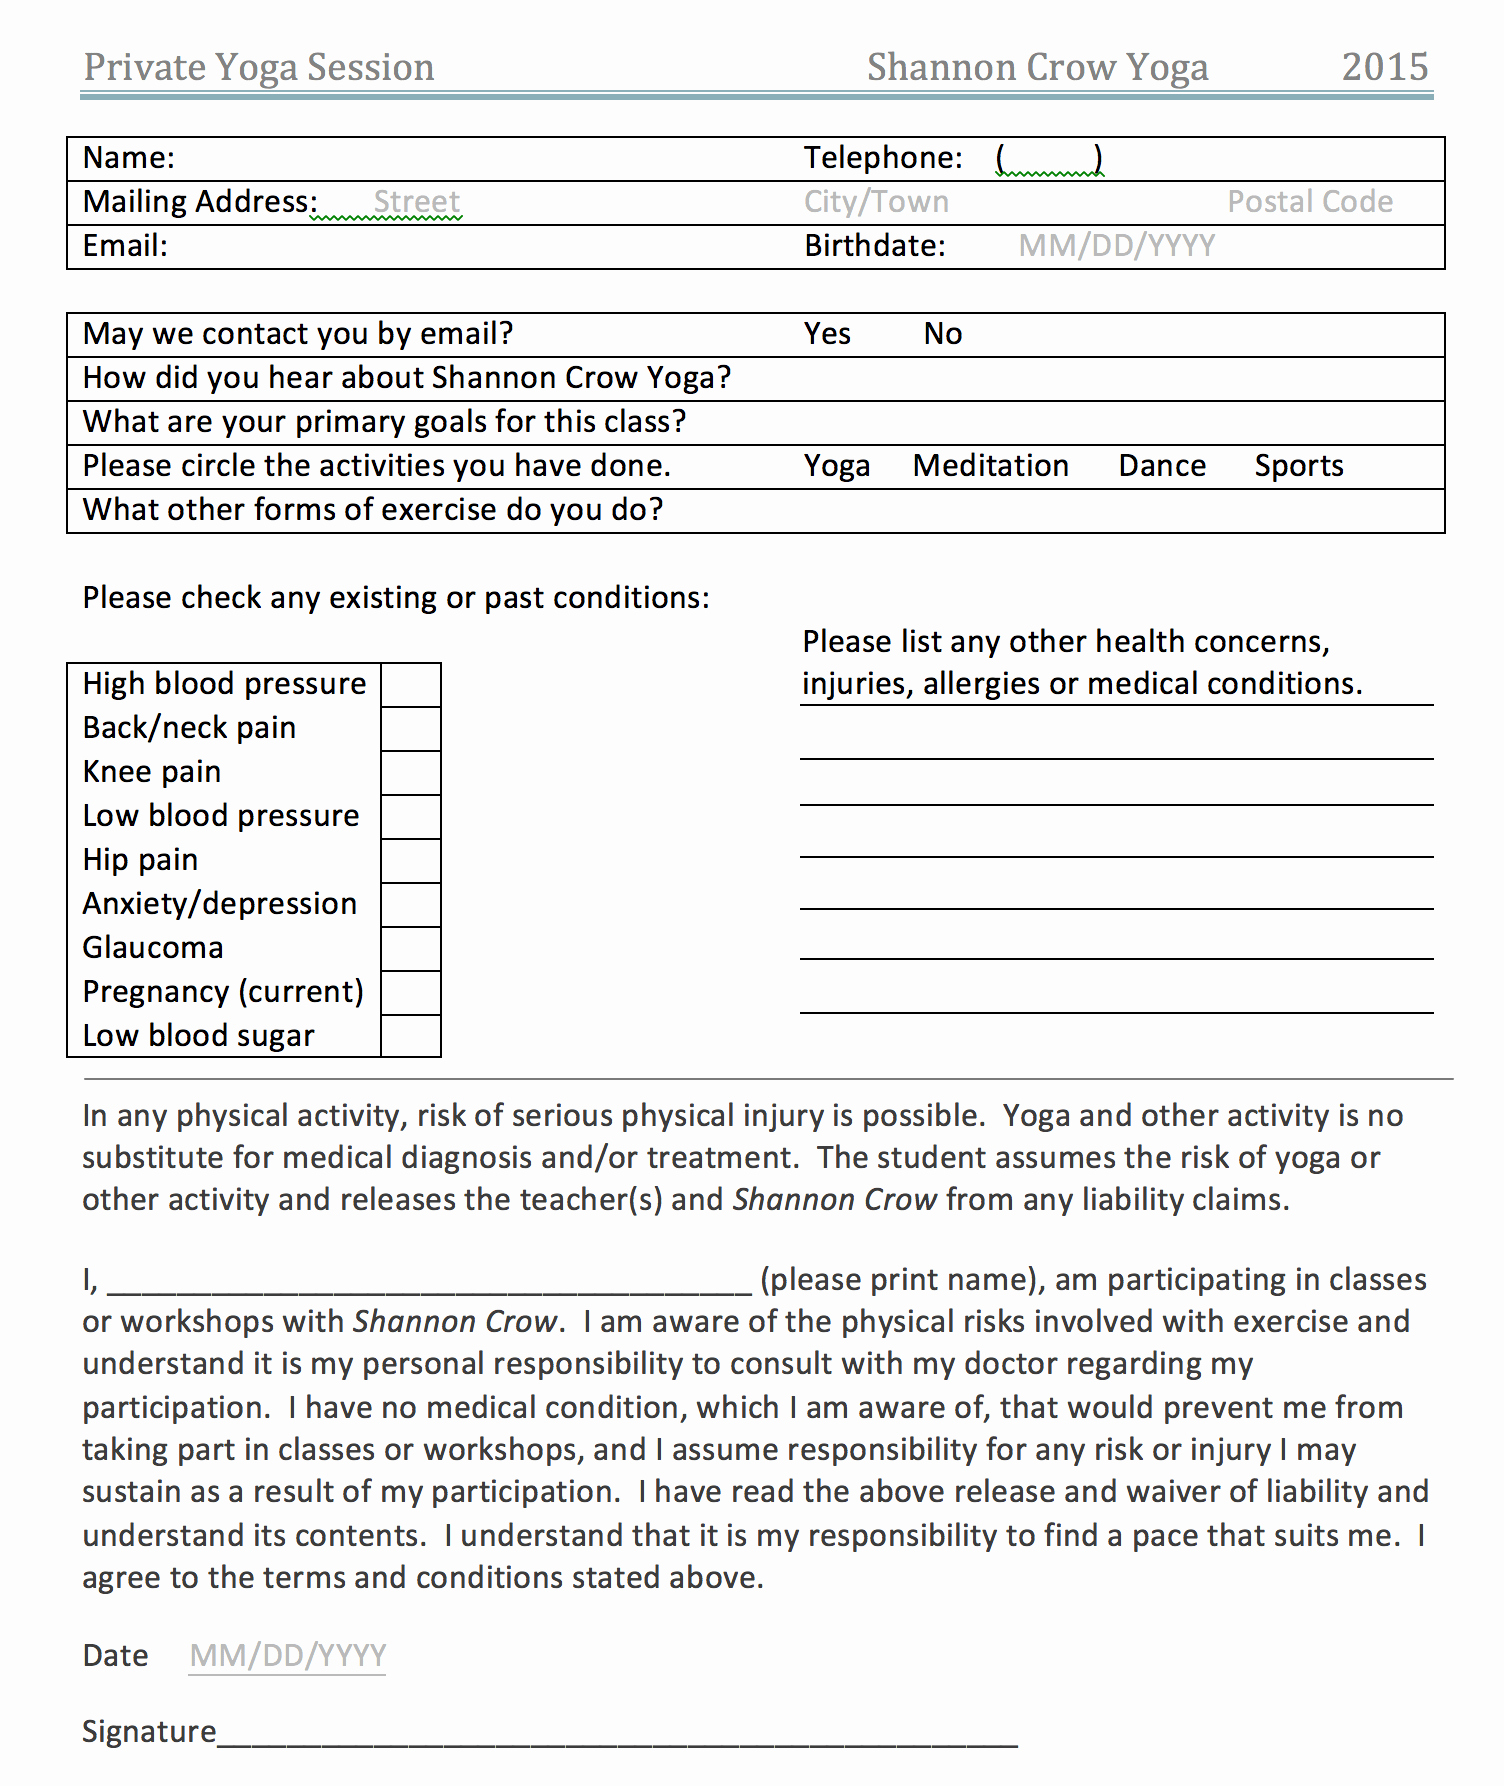 Private Yoga Class Waiver form Shannon Crow